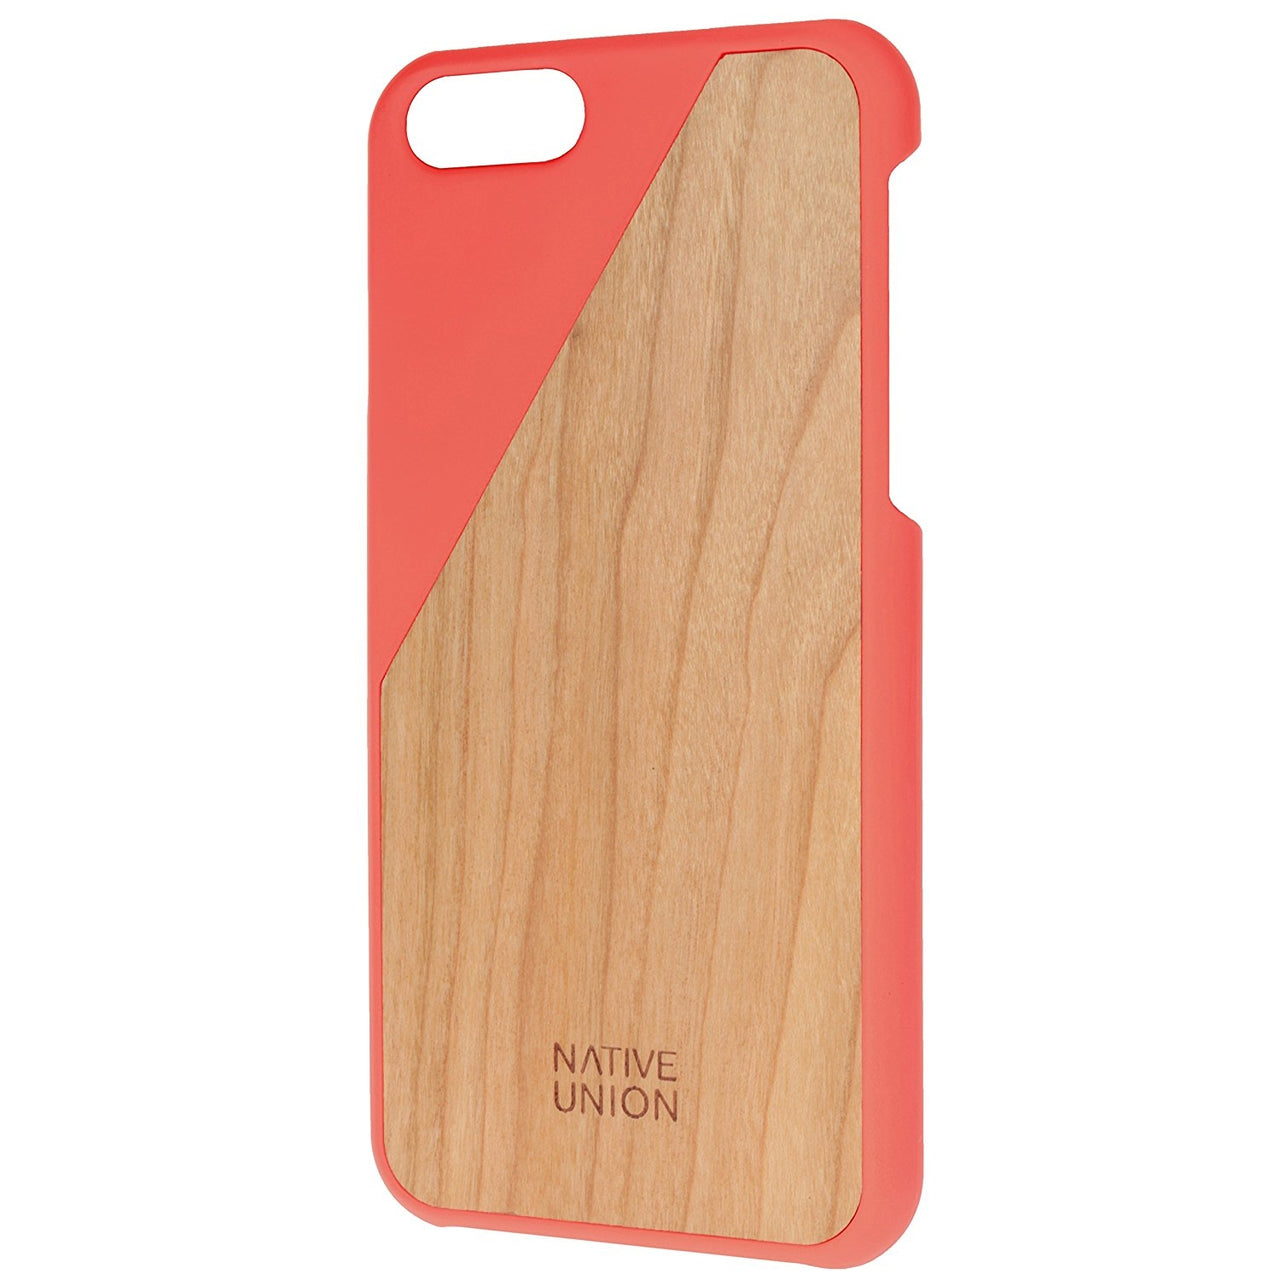 Native Union Clic Wooden Case for iPhone 6/6s/7/8 - Coral